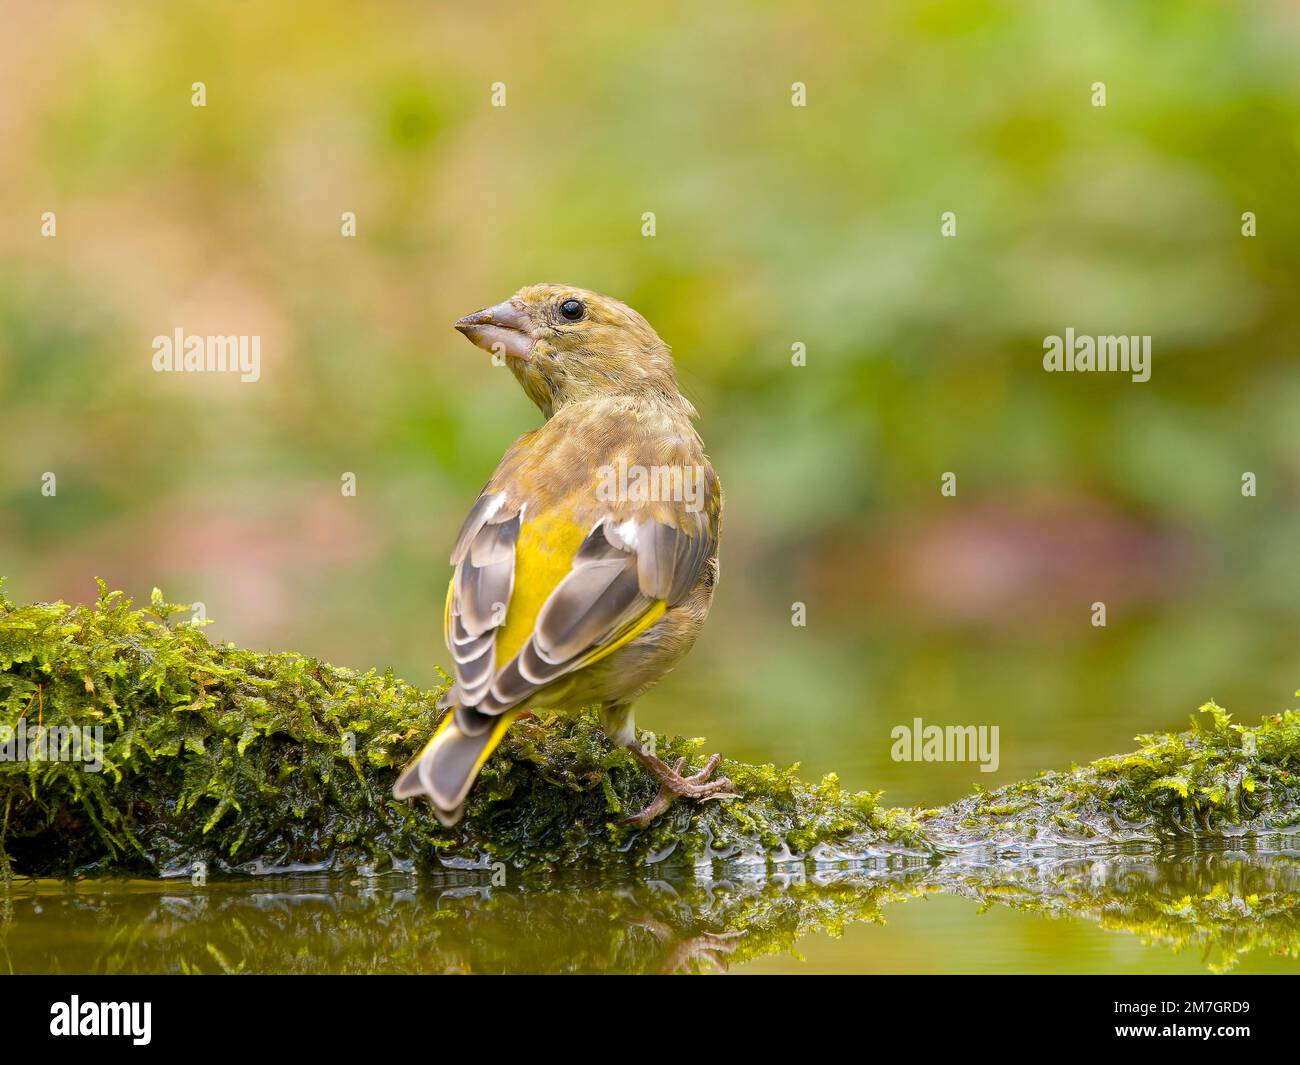 European greenfinch (Carduelis chloris), sitting on a mossy root in shallow water, Solms, Hesse, Germany Stock Photo